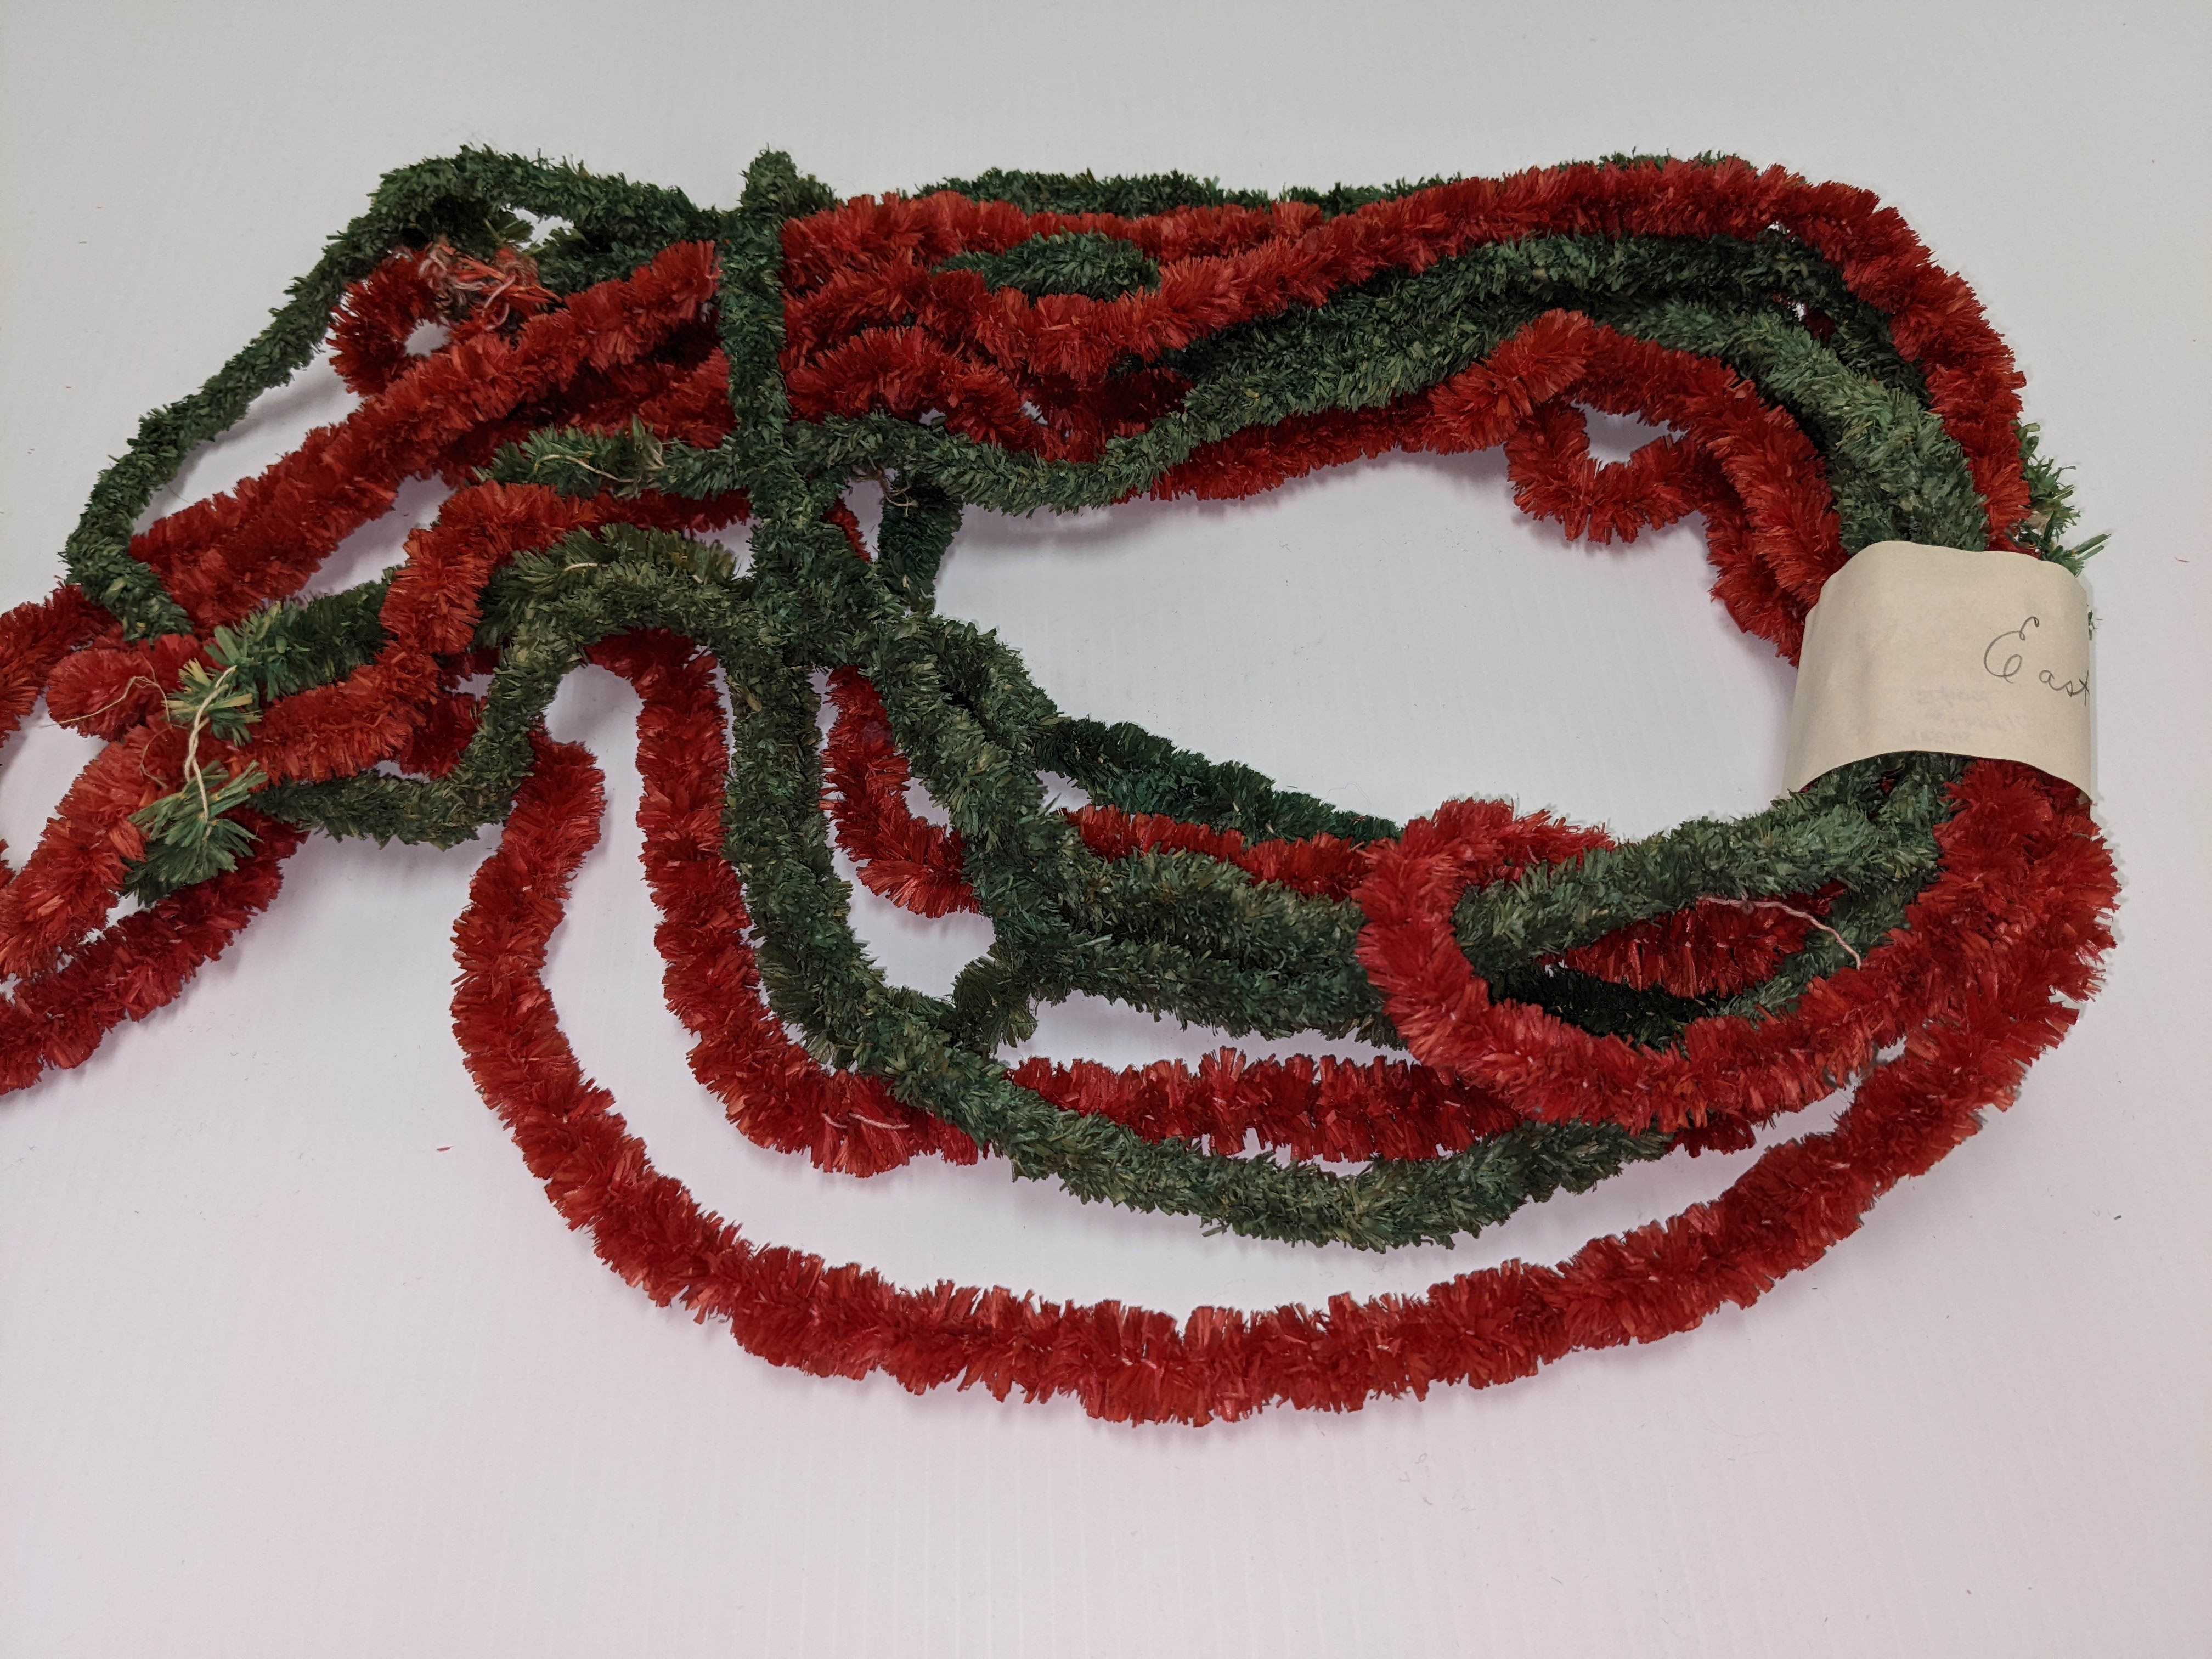 Look at this beautiful garland that once adorned many a Christmas tree! It's made of a natural fibre (potentially straw or grass) sewn and twisted together along a string. The garland was then dyed to get rich red and green colours. Though we are unsure of the time period this artifact comes from - it is very fragile and takes great care to prevent it from flaking apart!

13/12/2021
2002.226.118.02 / Campbell, Jean